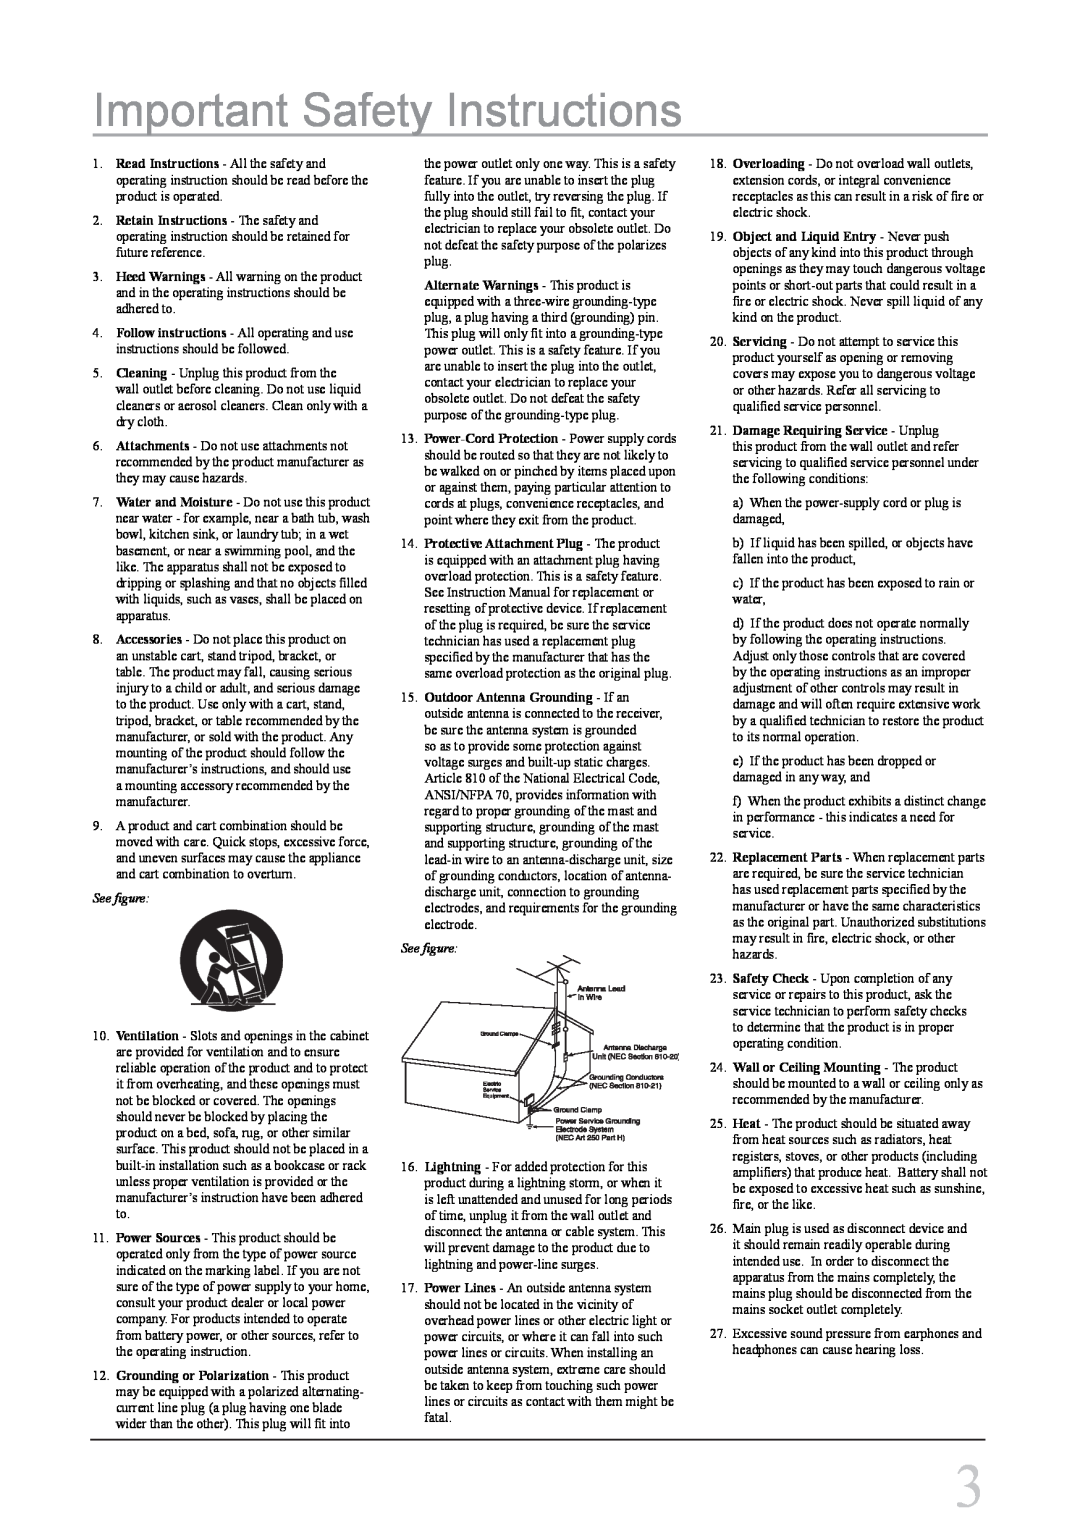 GPX HMD8017DT instruction manual Important Safety Instructions, See figure 